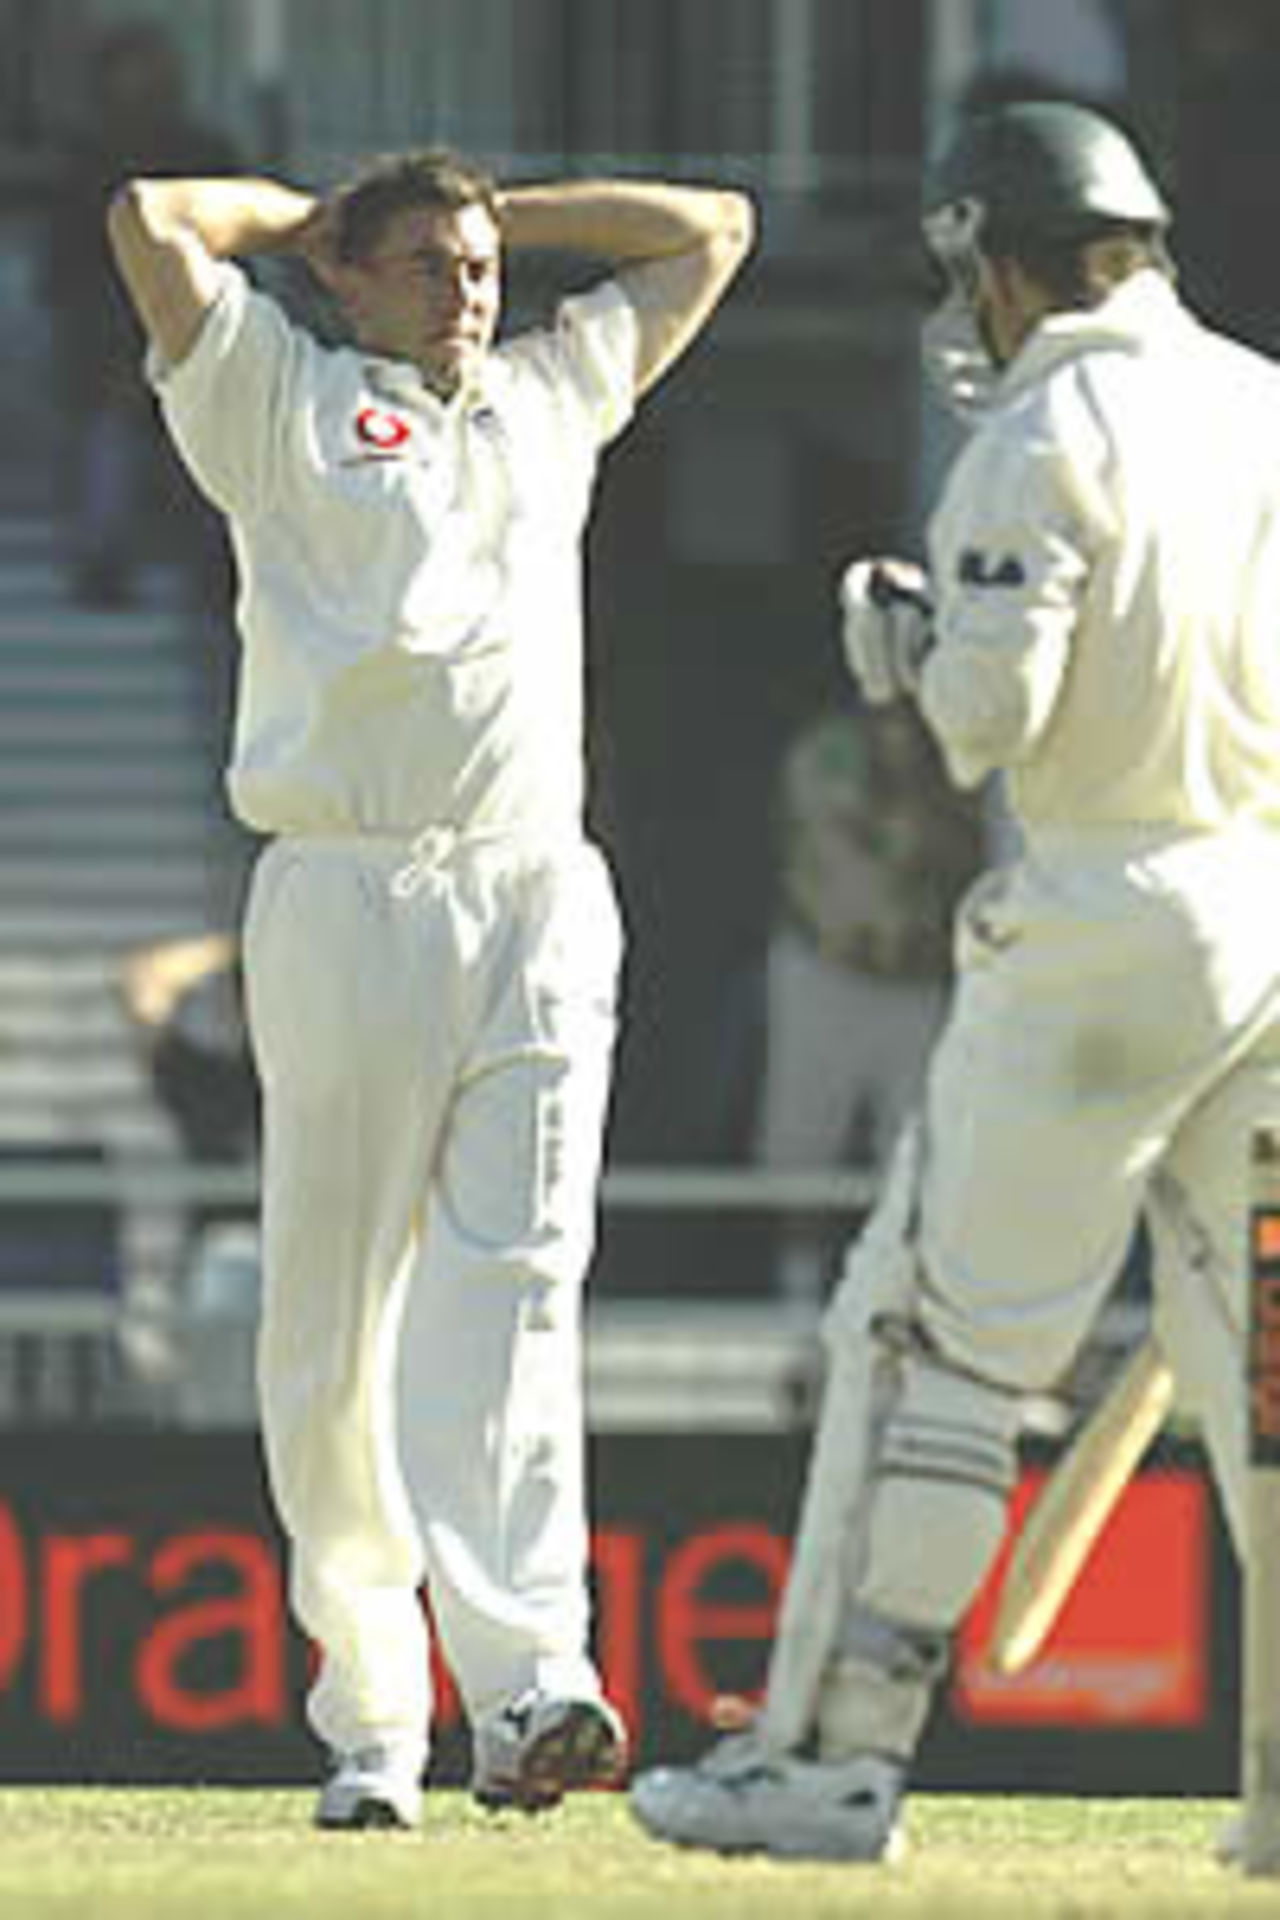 PERTH - NOVEMBER 29: Chris Silverwood of England shows his frustration during day one of the Third Ashes Test between Australia and England, played at the WACA in Perth, Australia, on November 29, 2002.